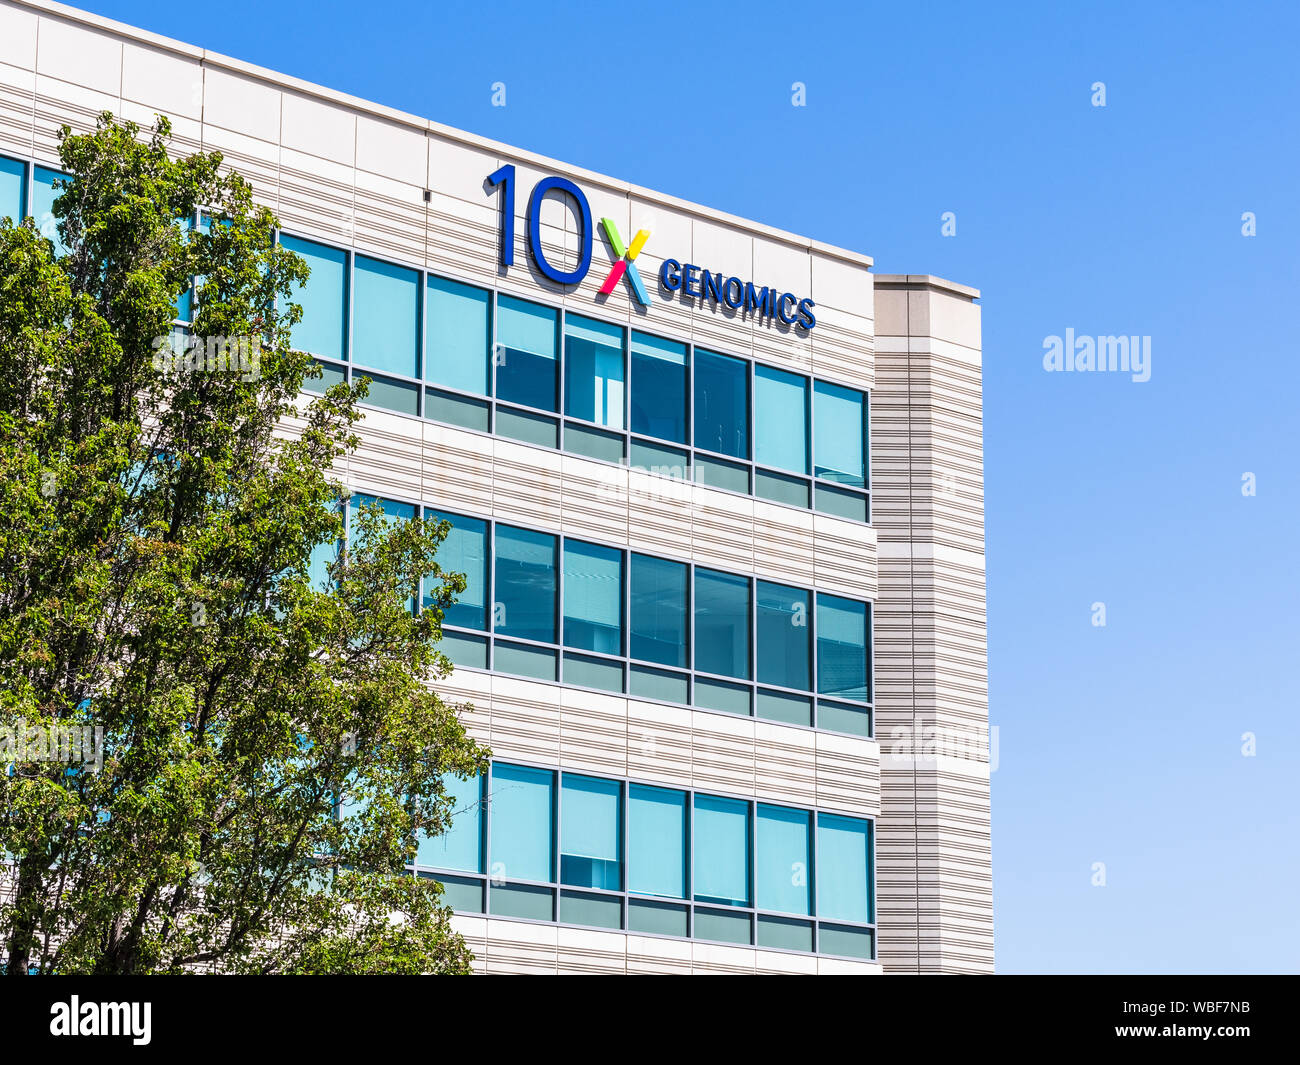 August 25, 2019 Pleasanton / CA / USA - 10x Genomics headquarters in Silicon Valley; 10x Genomics is an American biotechnology company that designs an Stock Photo